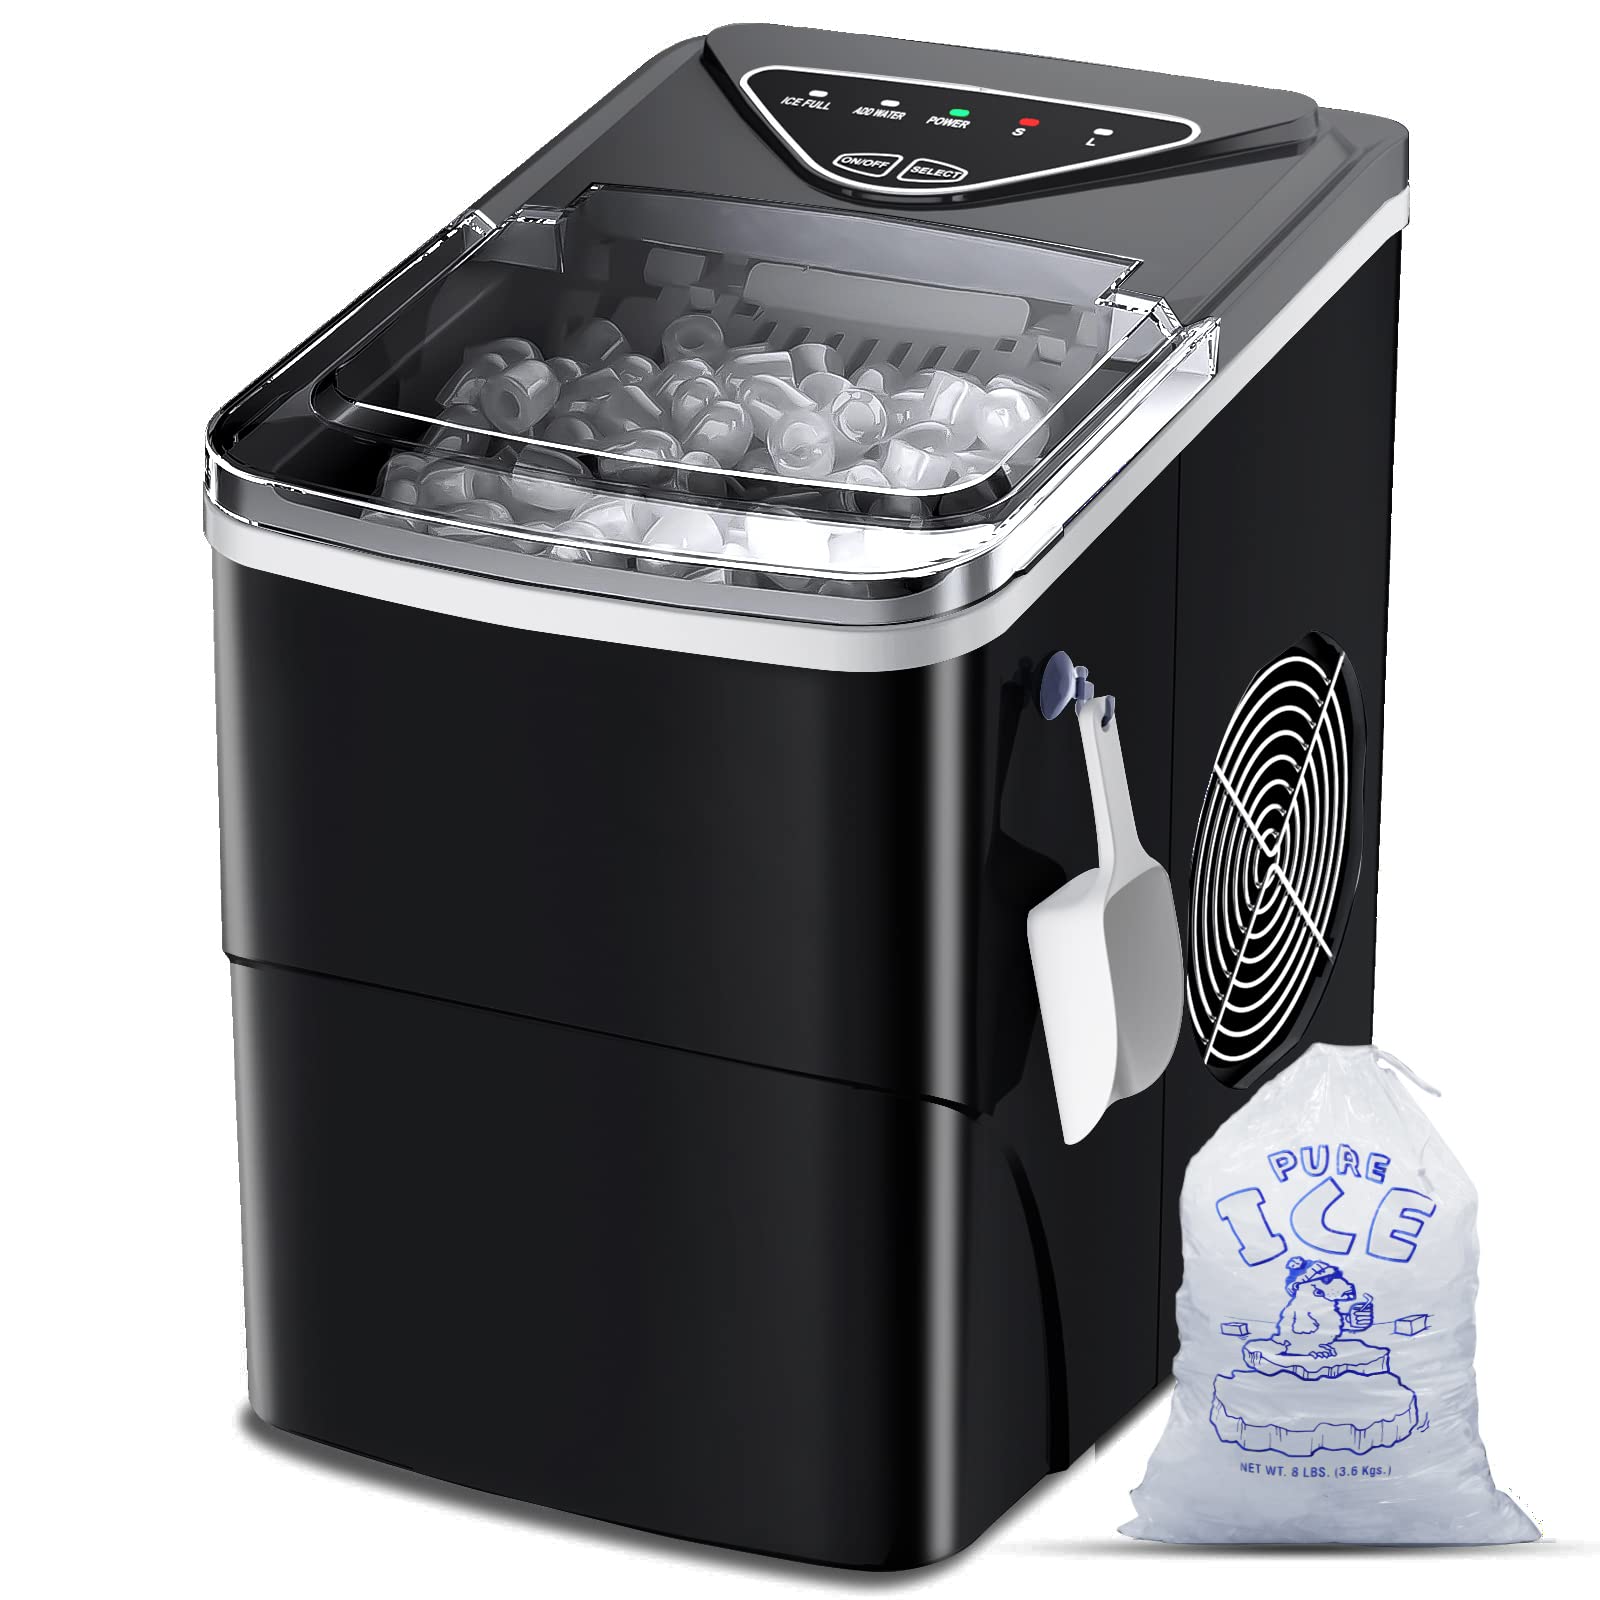 Ice Makers Countertop, Self-Cleaning Function, Portable Electric Ice Cube Maker Machine, 9 Pellet Ice Ready in 6 Mins, 26lbs 24Hrs with Ice Bags and Scoop Basket for Home Bar Camping RV(Black)